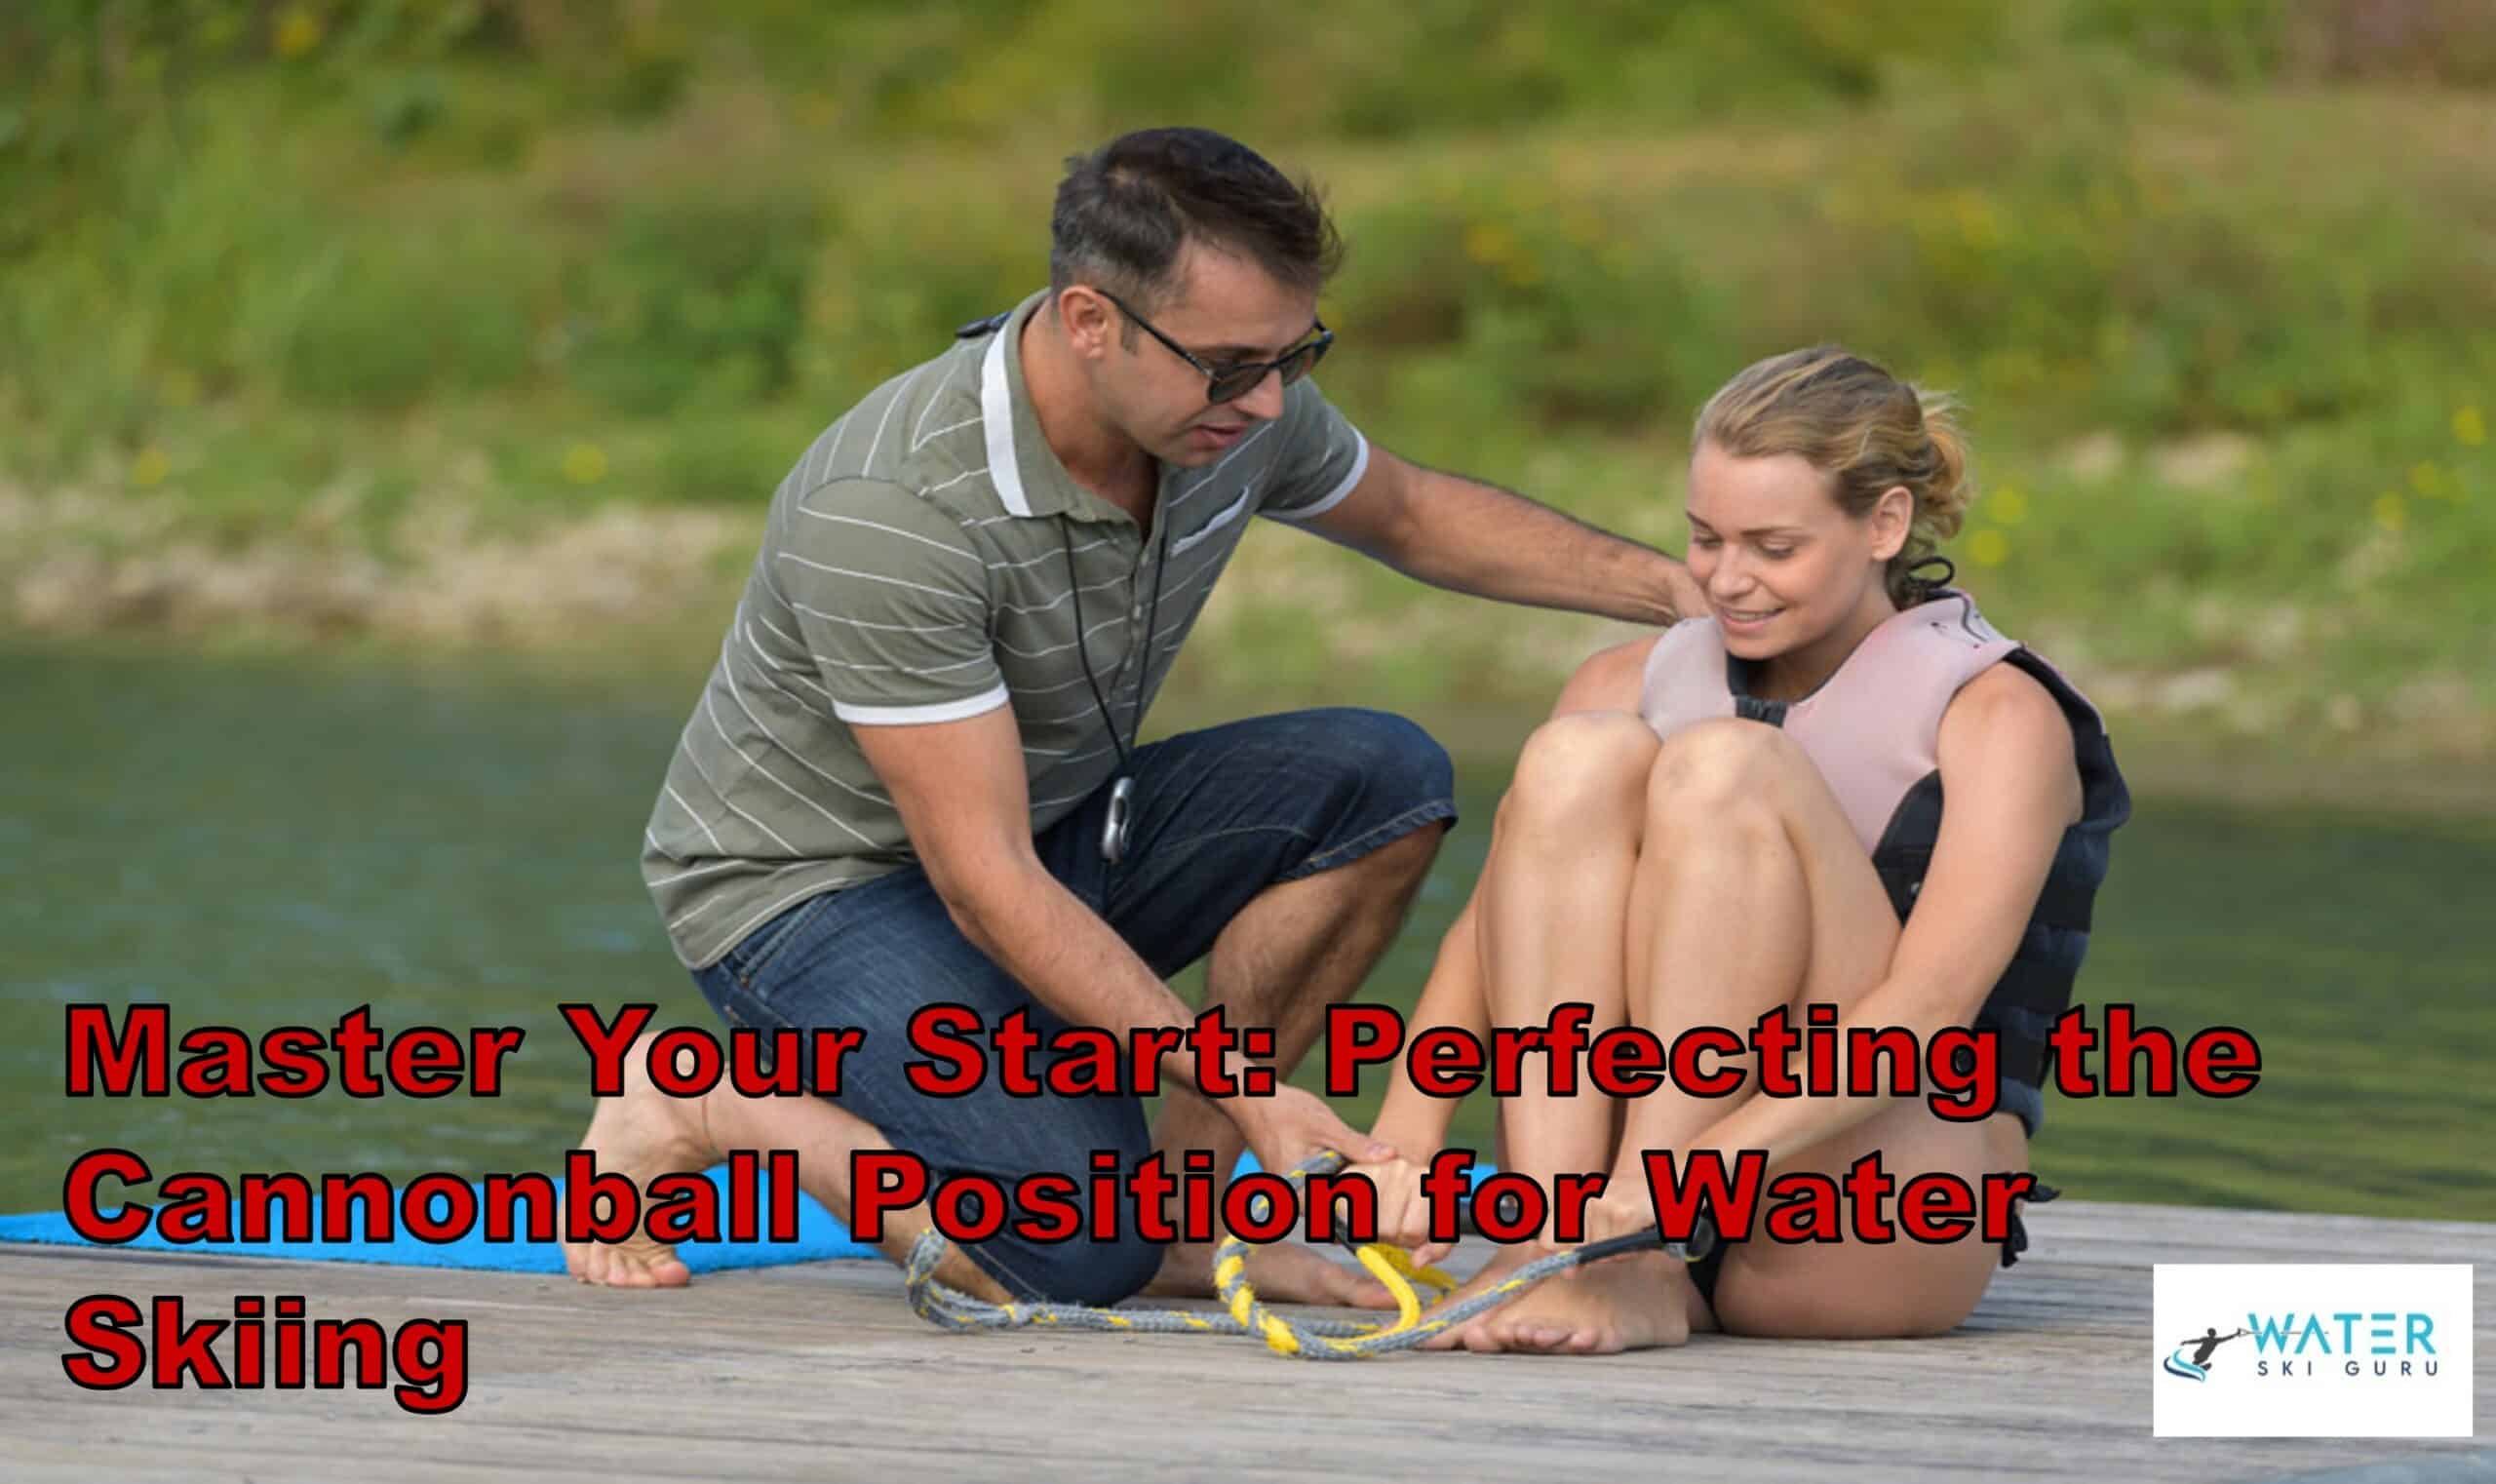 Master Your Start: Perfecting the Cannonball Position for Water Skiing